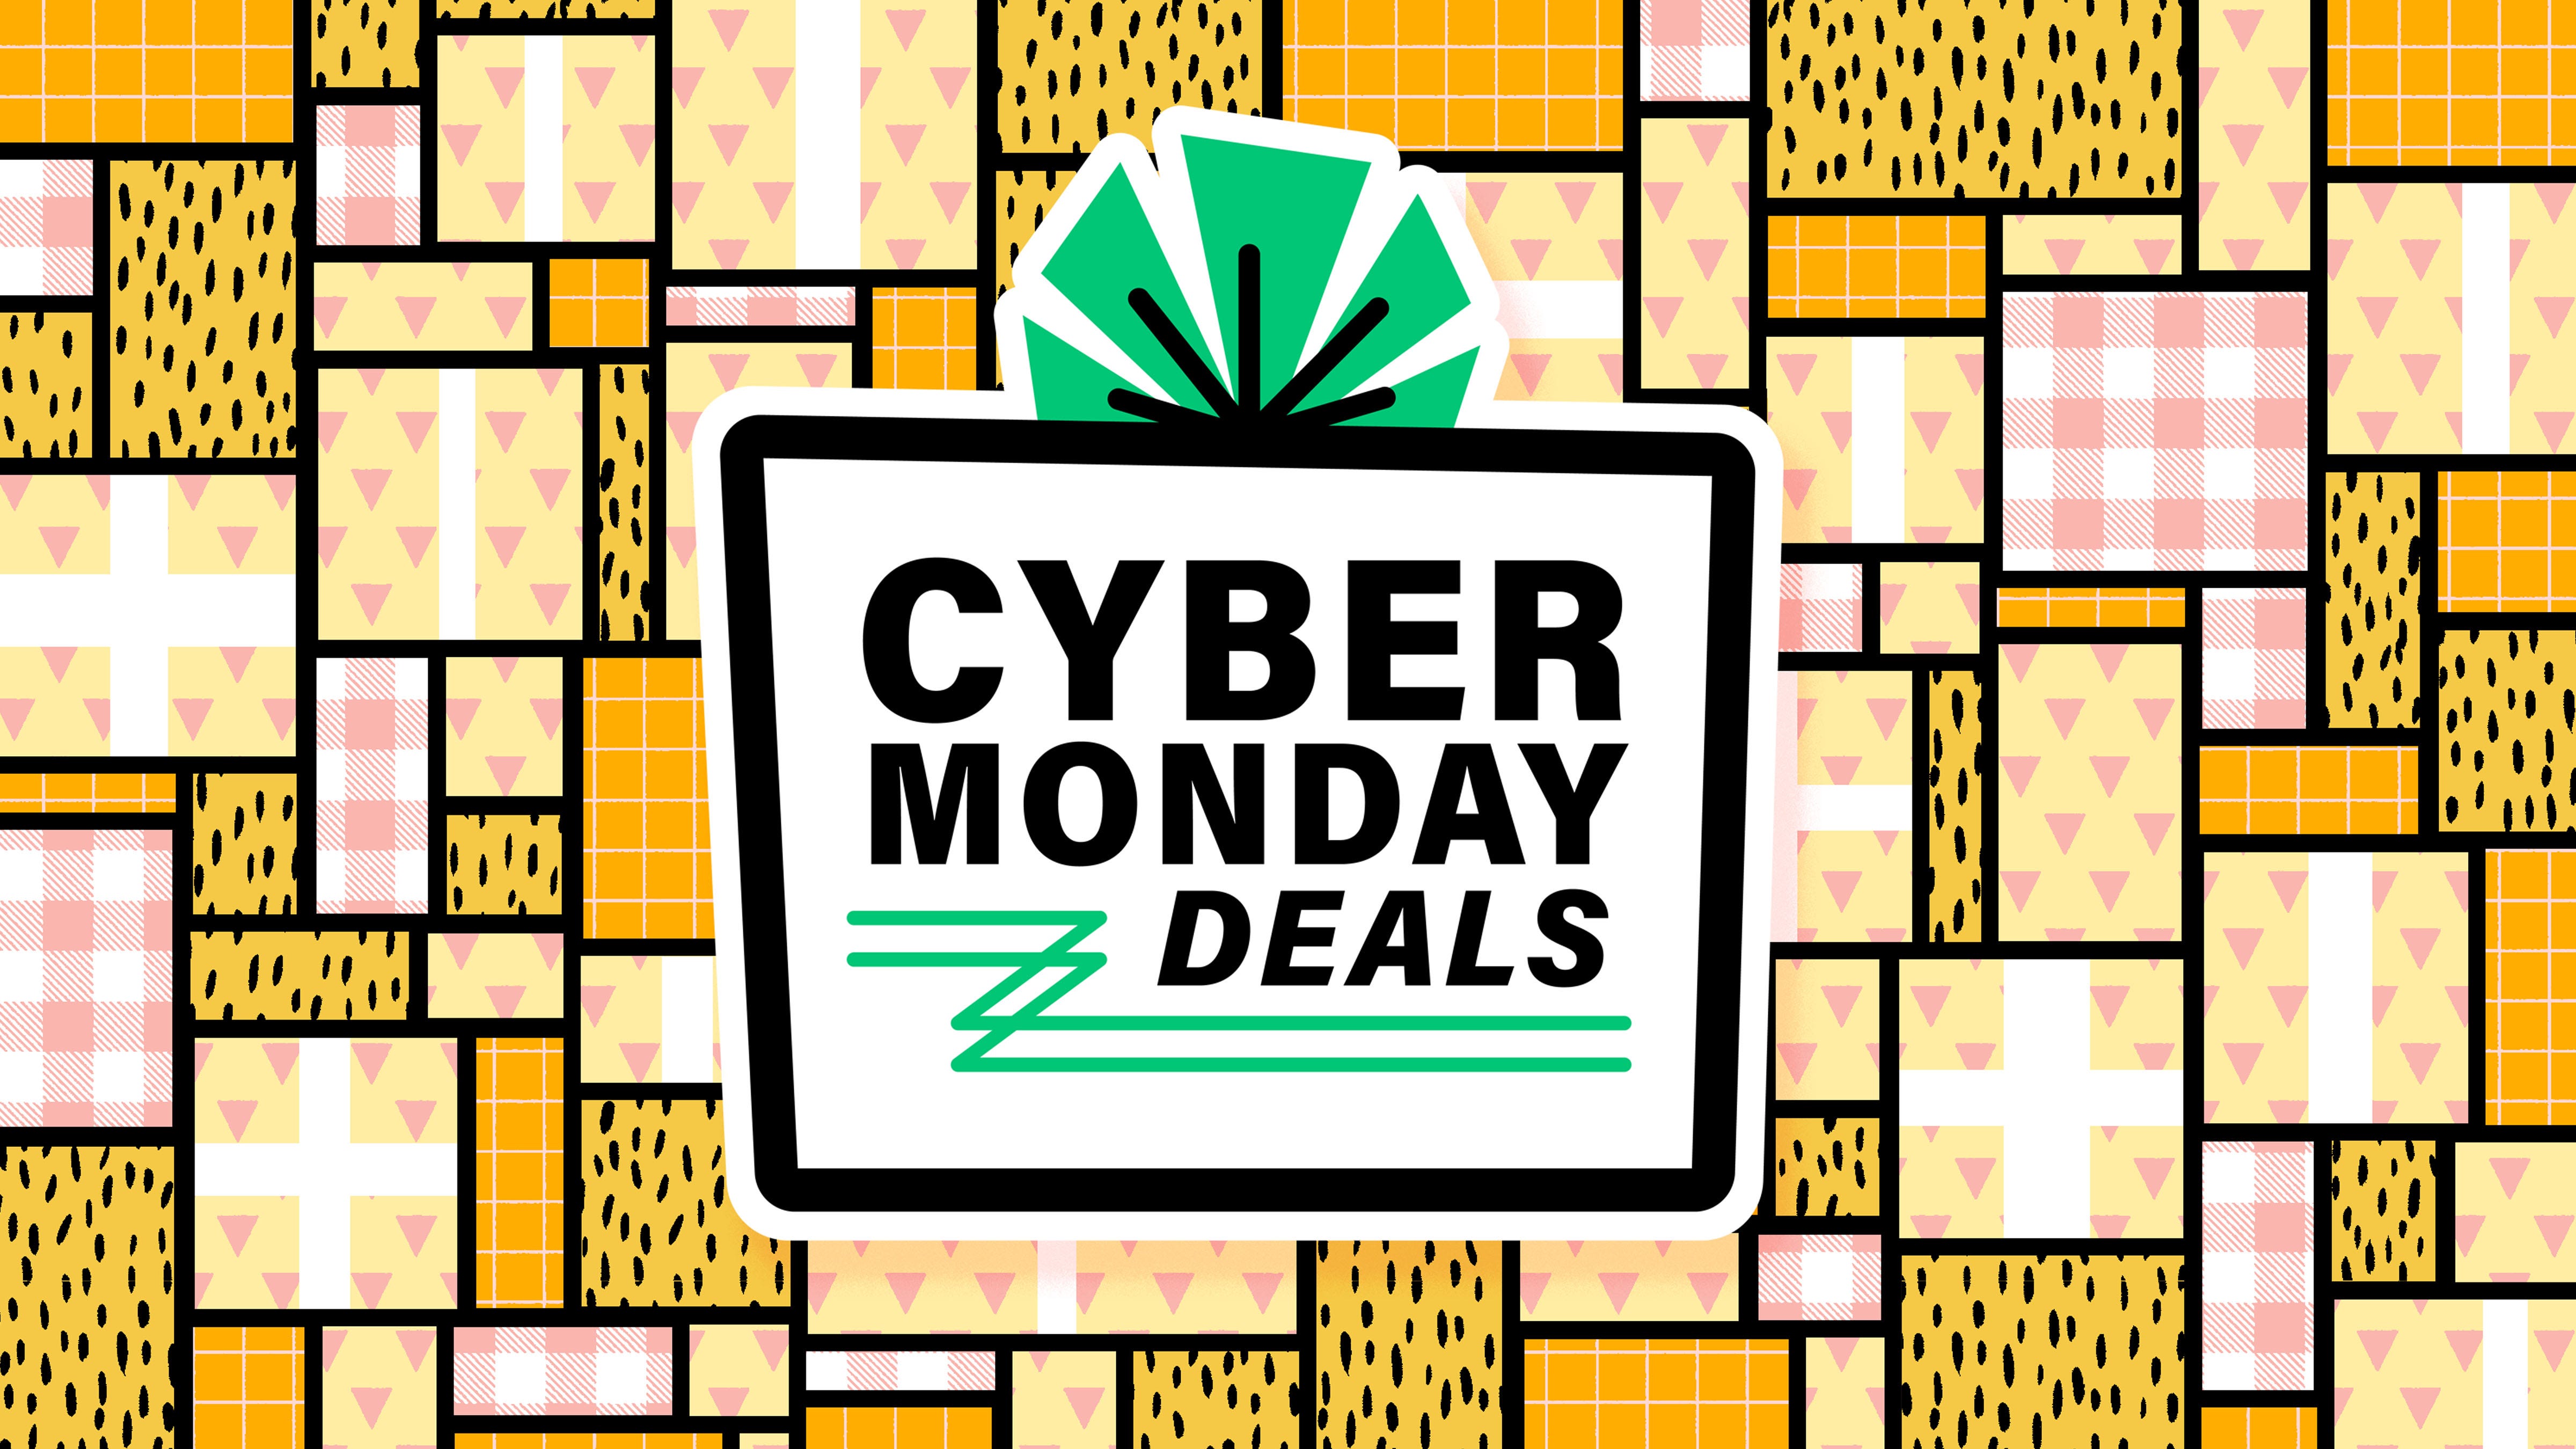 Cyber Monday deals: Shop the 140+ best last-minute savings to find